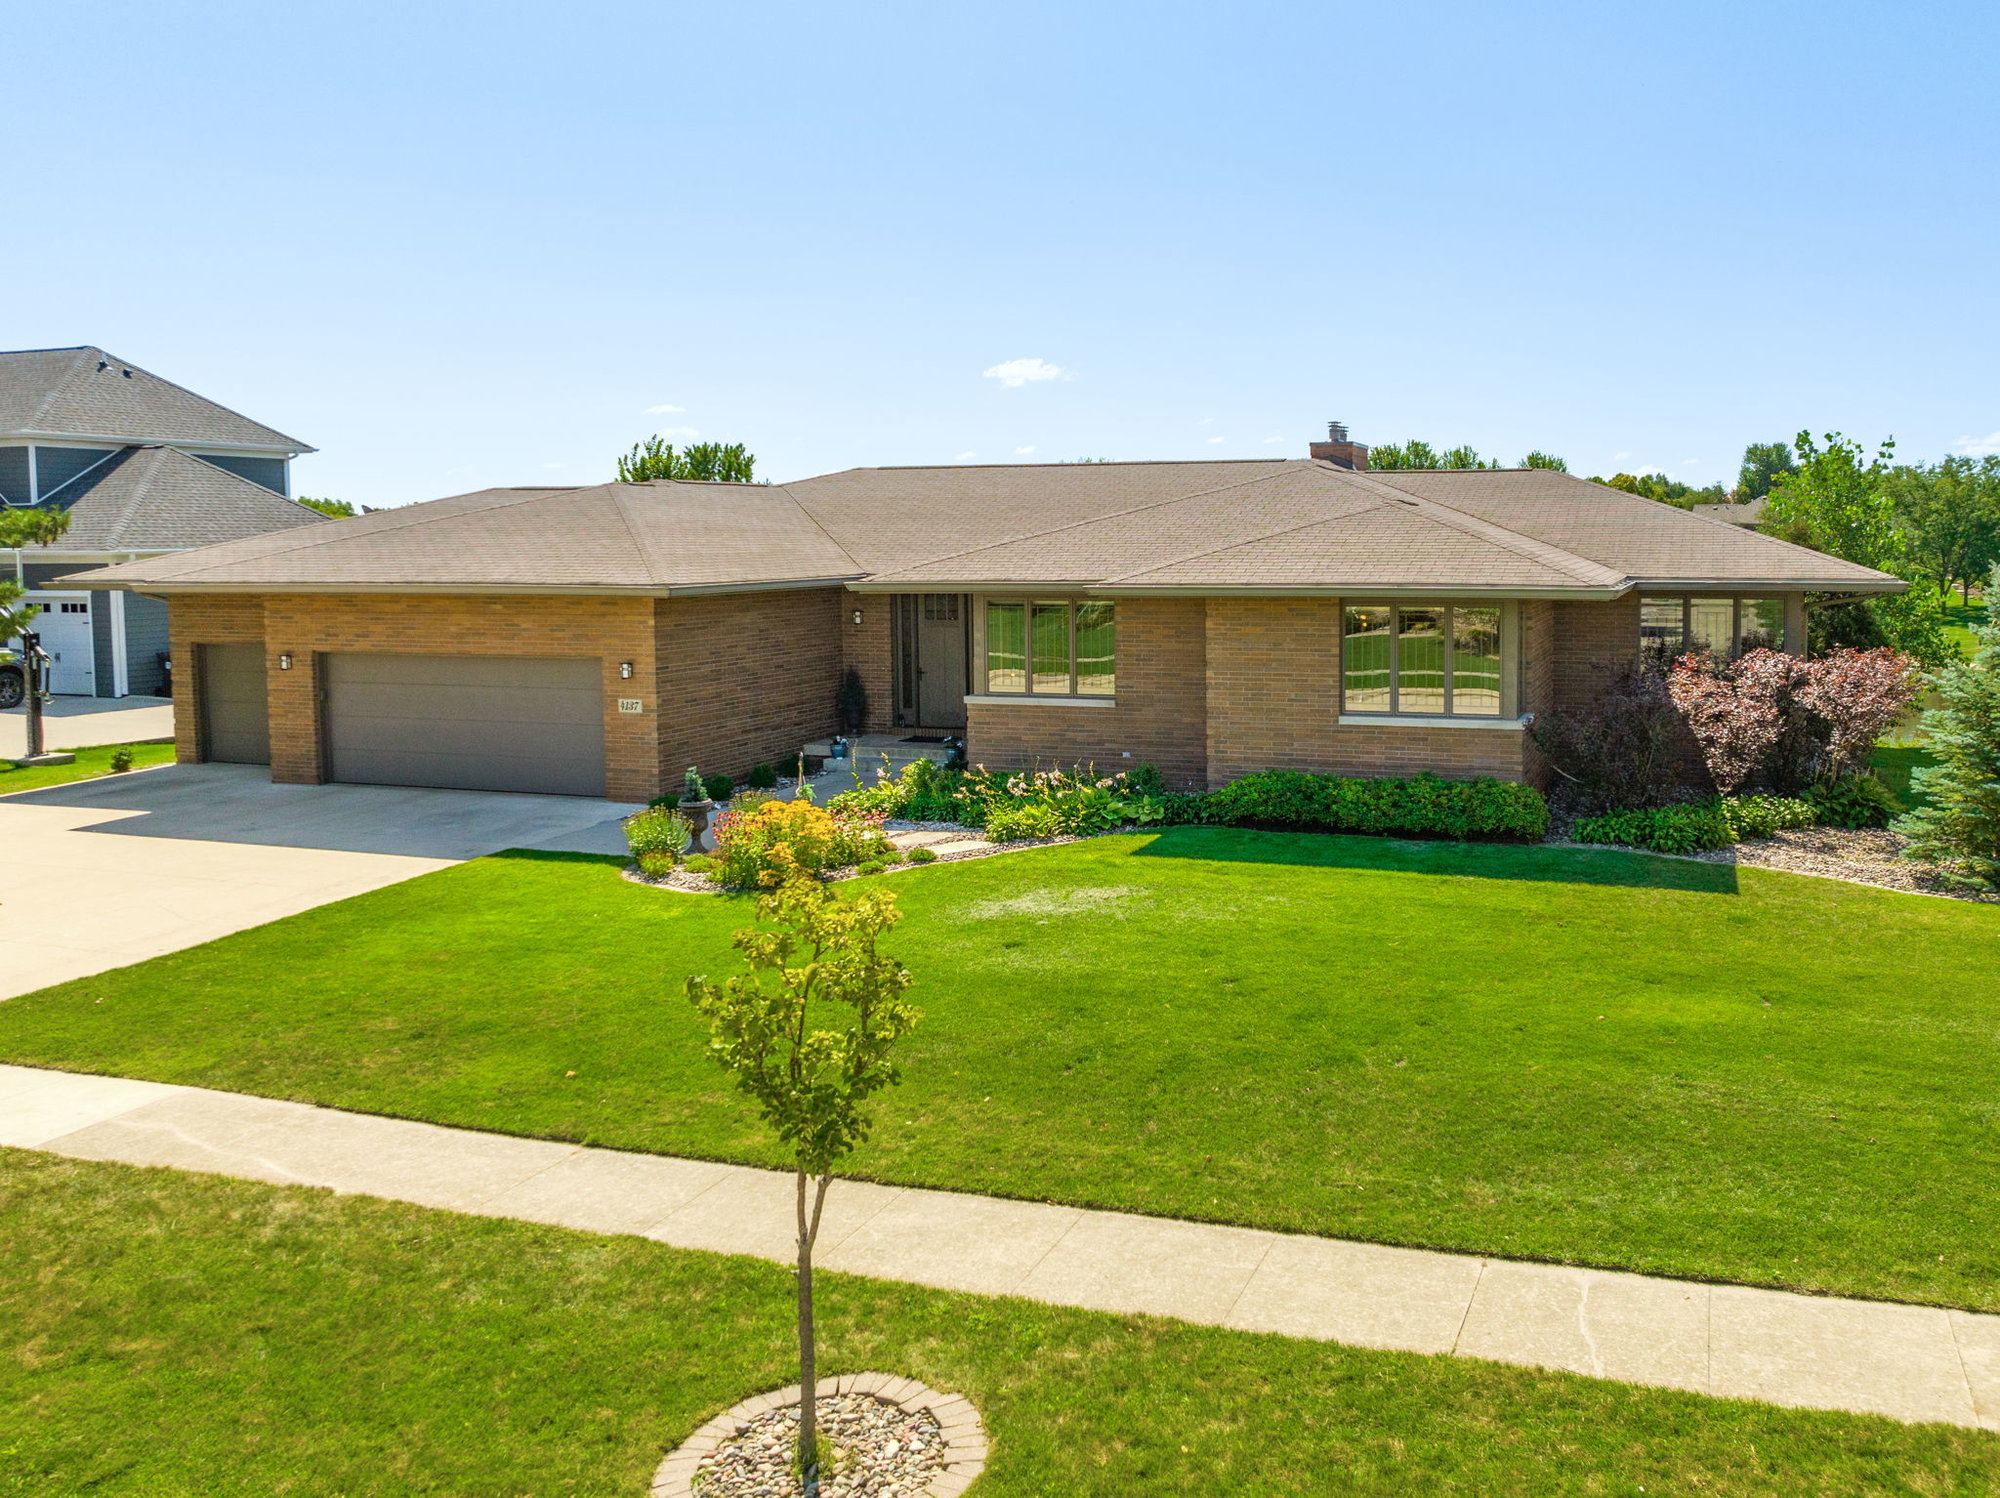 This Custom Built Sprawling Ranch is Unmatched in Today's Market - 4137 Wynnewood Dr., Cedar Falls